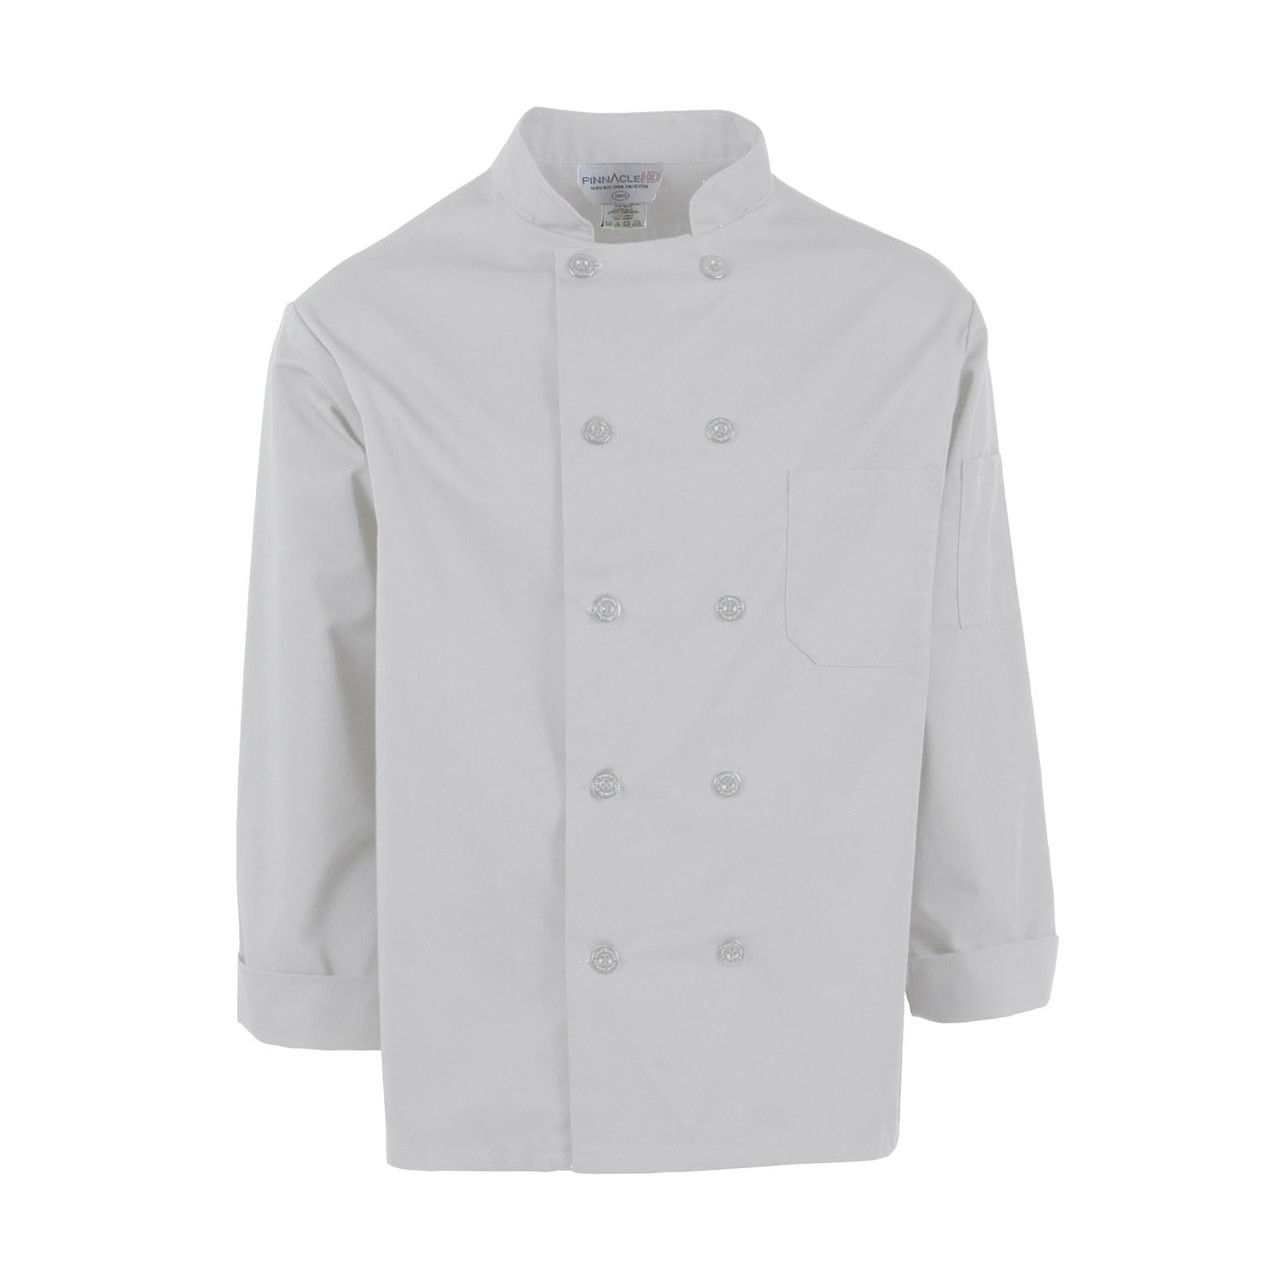 Does the chef coat have pinnacle buttons on its pockets?